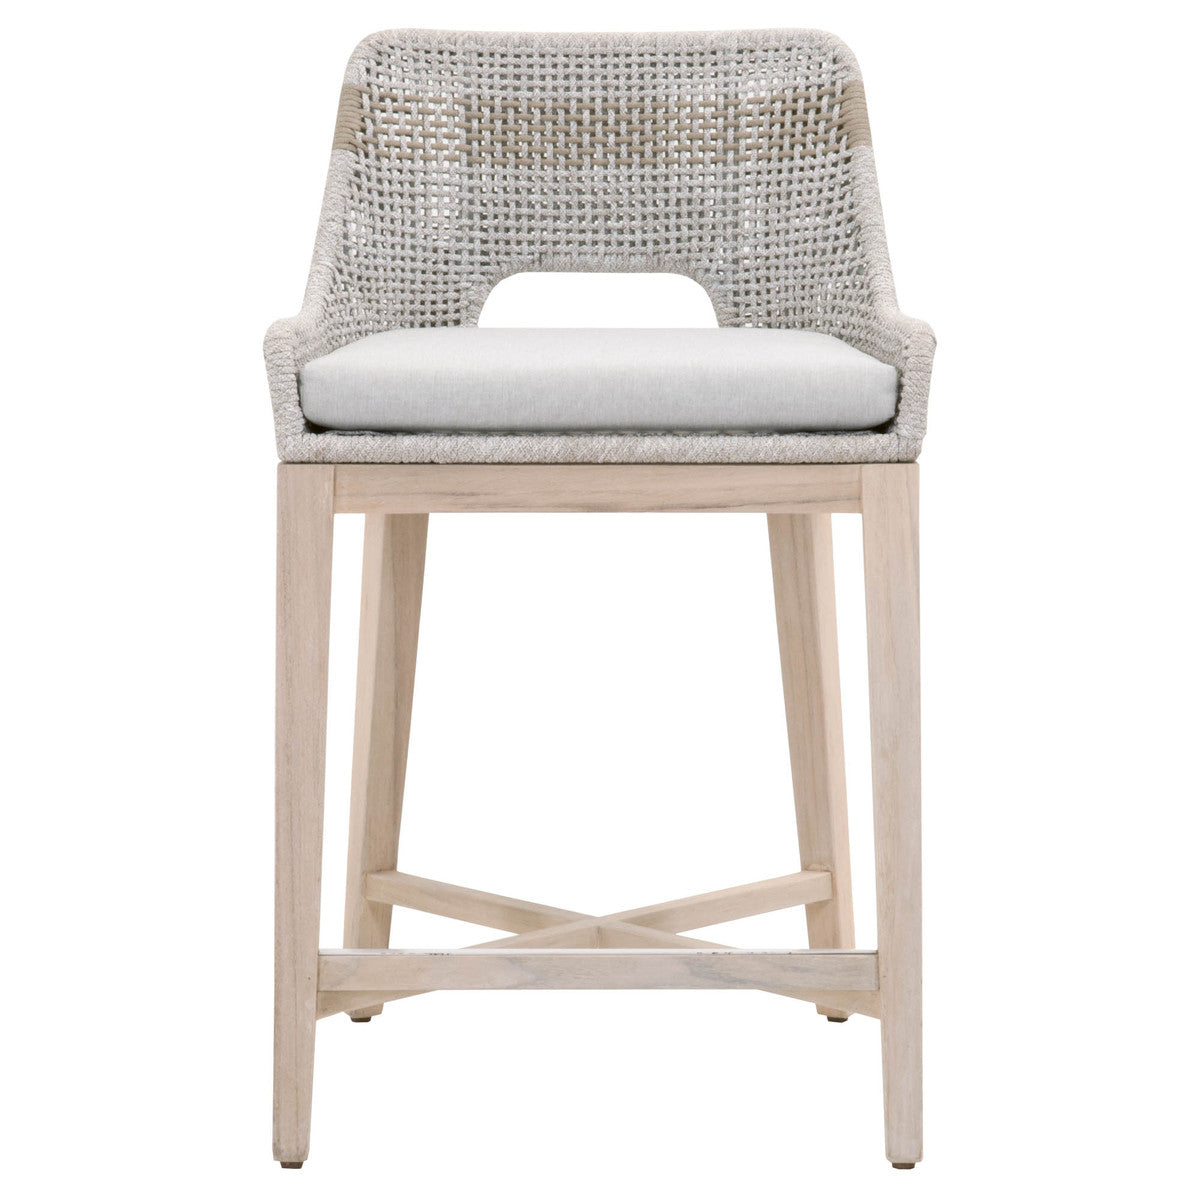 Strie Outdoor Counter Stool - Taupe